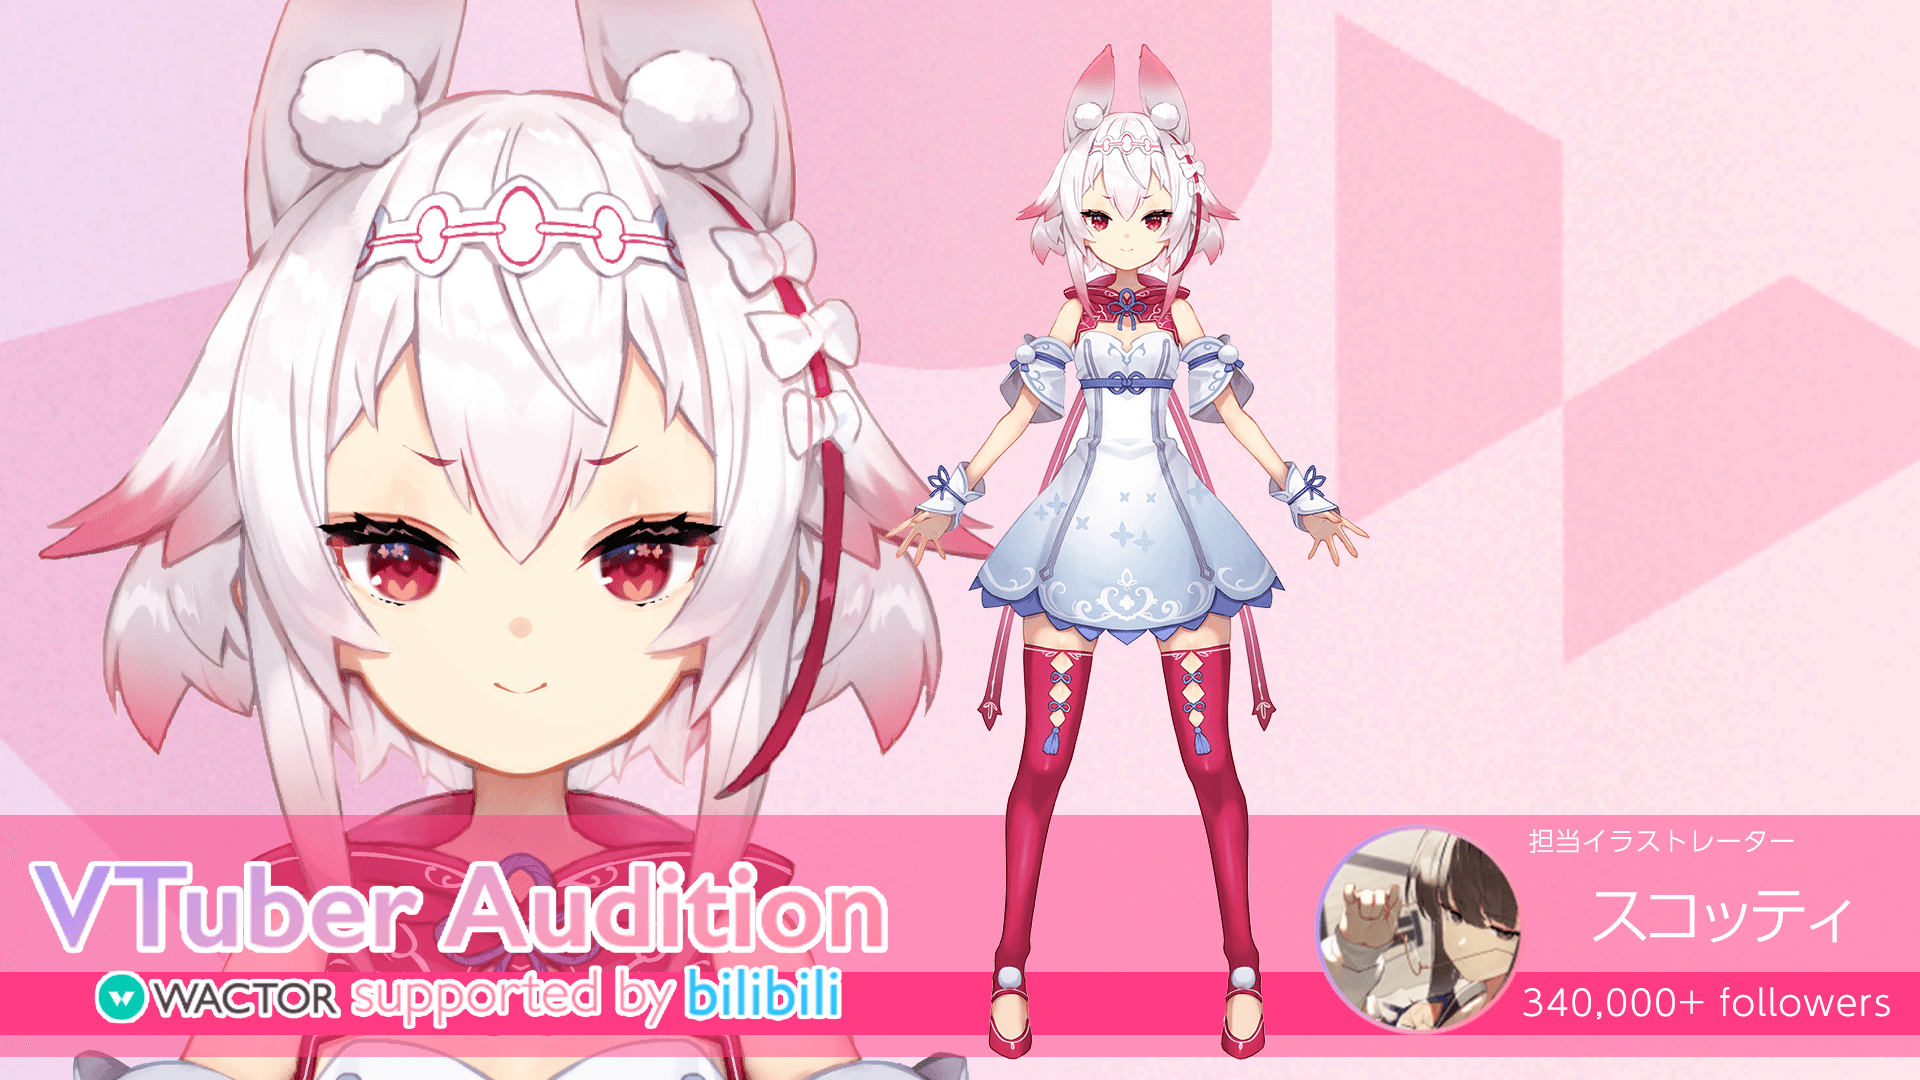 wactor-vtuber-audition-supported-by-bilibili-6